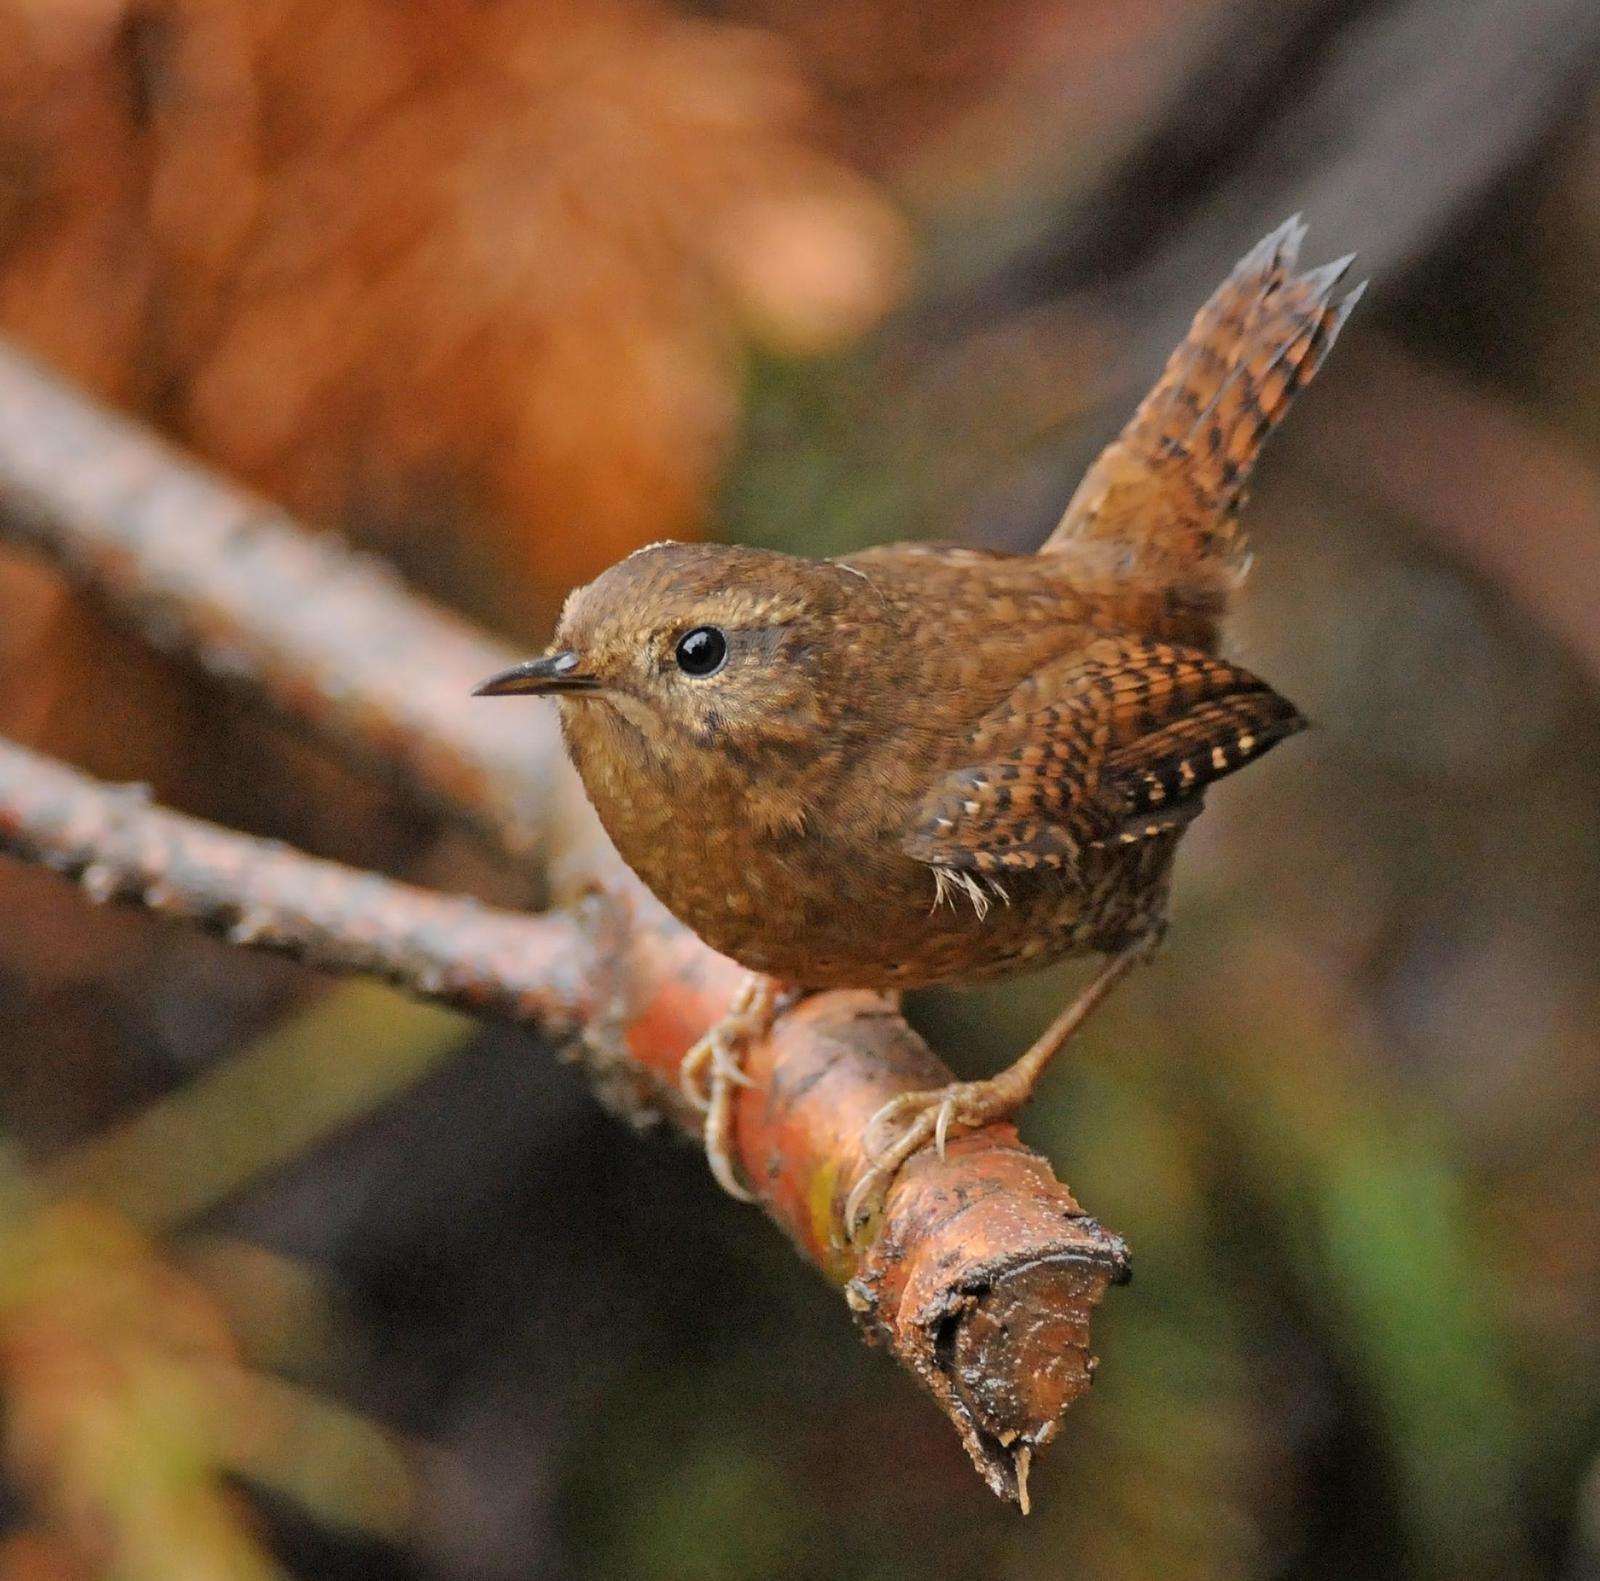 Pacific Wren (pacificus Group) Photo by Steven Mlodinow